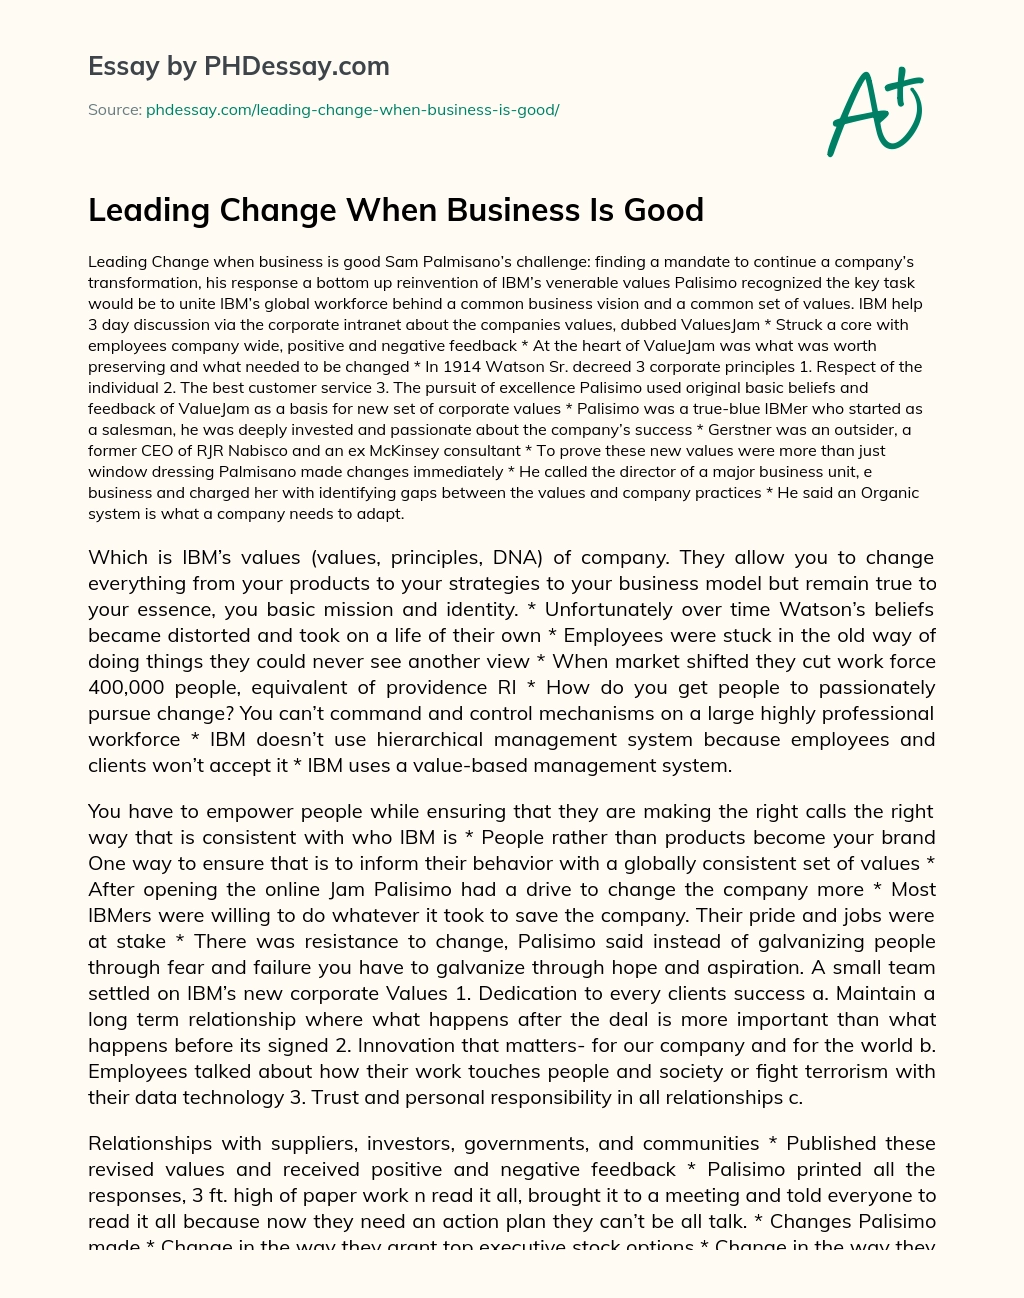 Leading Change When Business Is Good essay